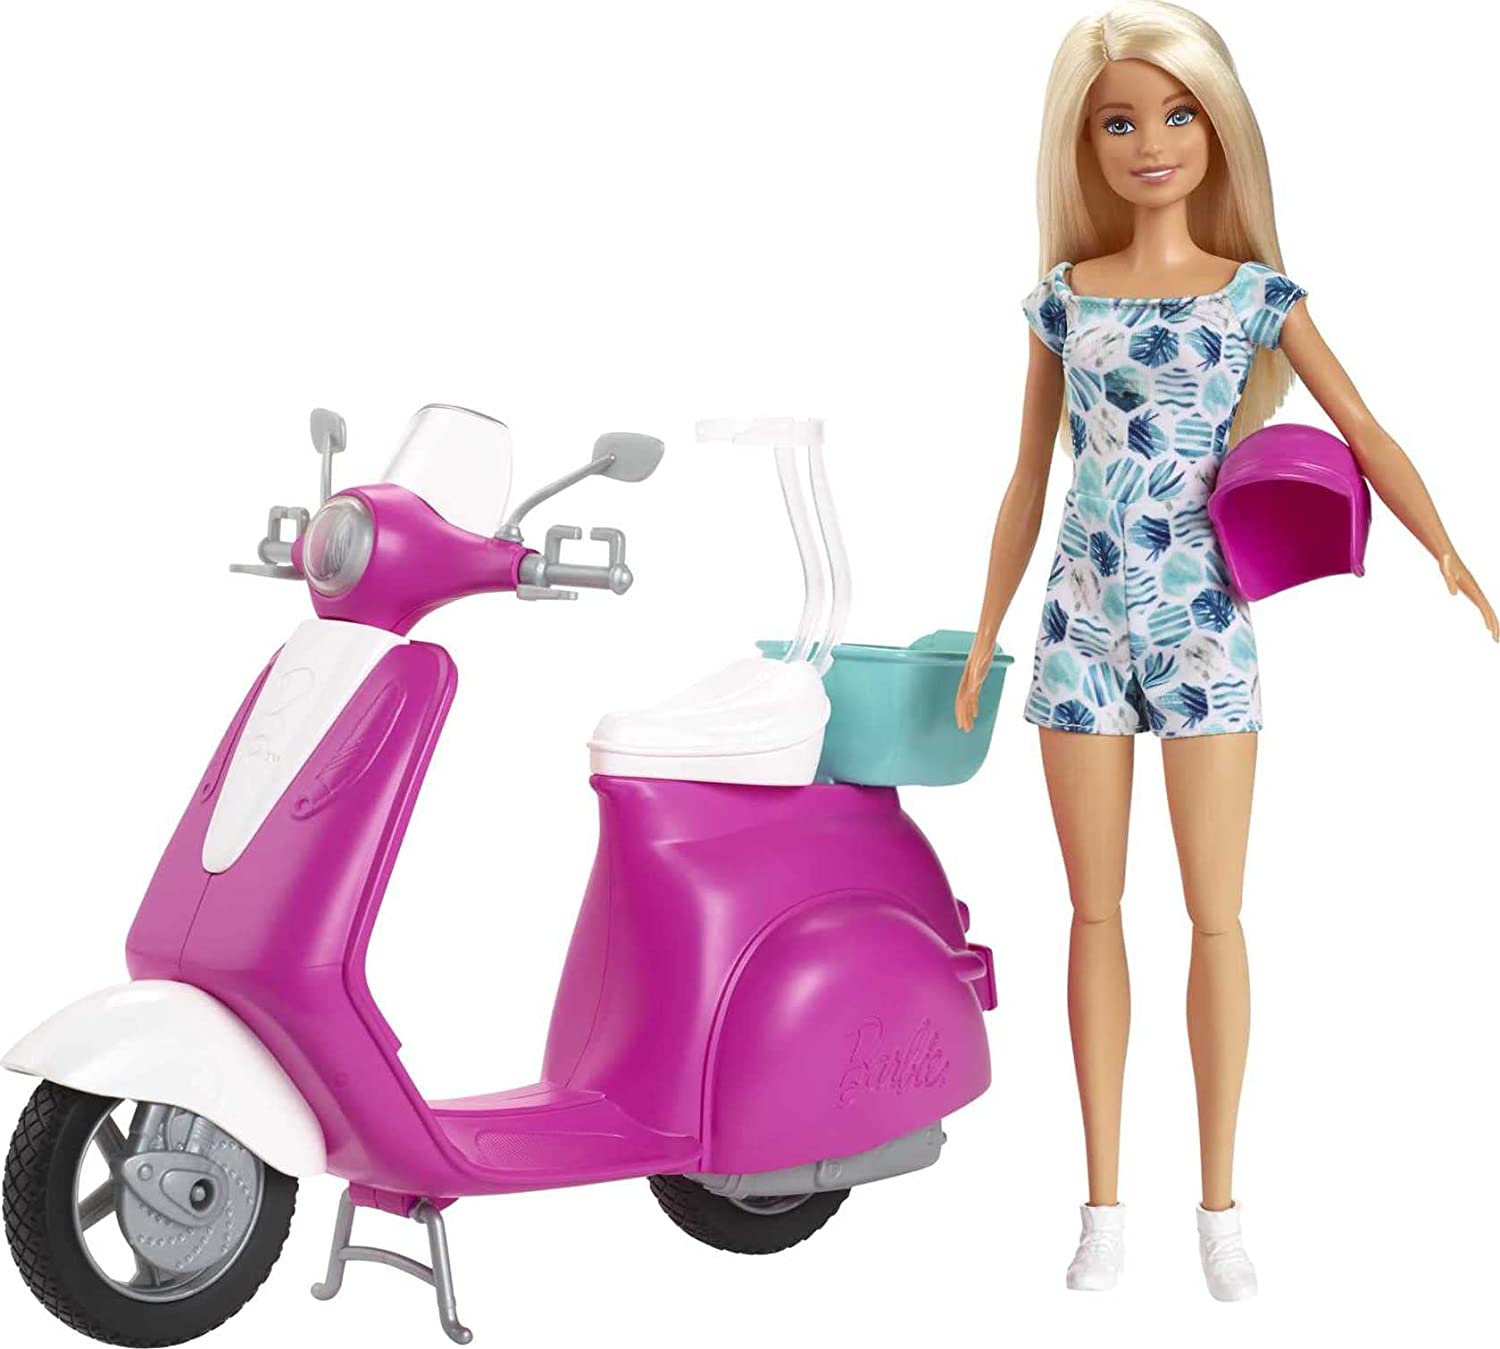 band ignorere dyd Barbie Doll & Scooter Pink European Version Vespa — DNA